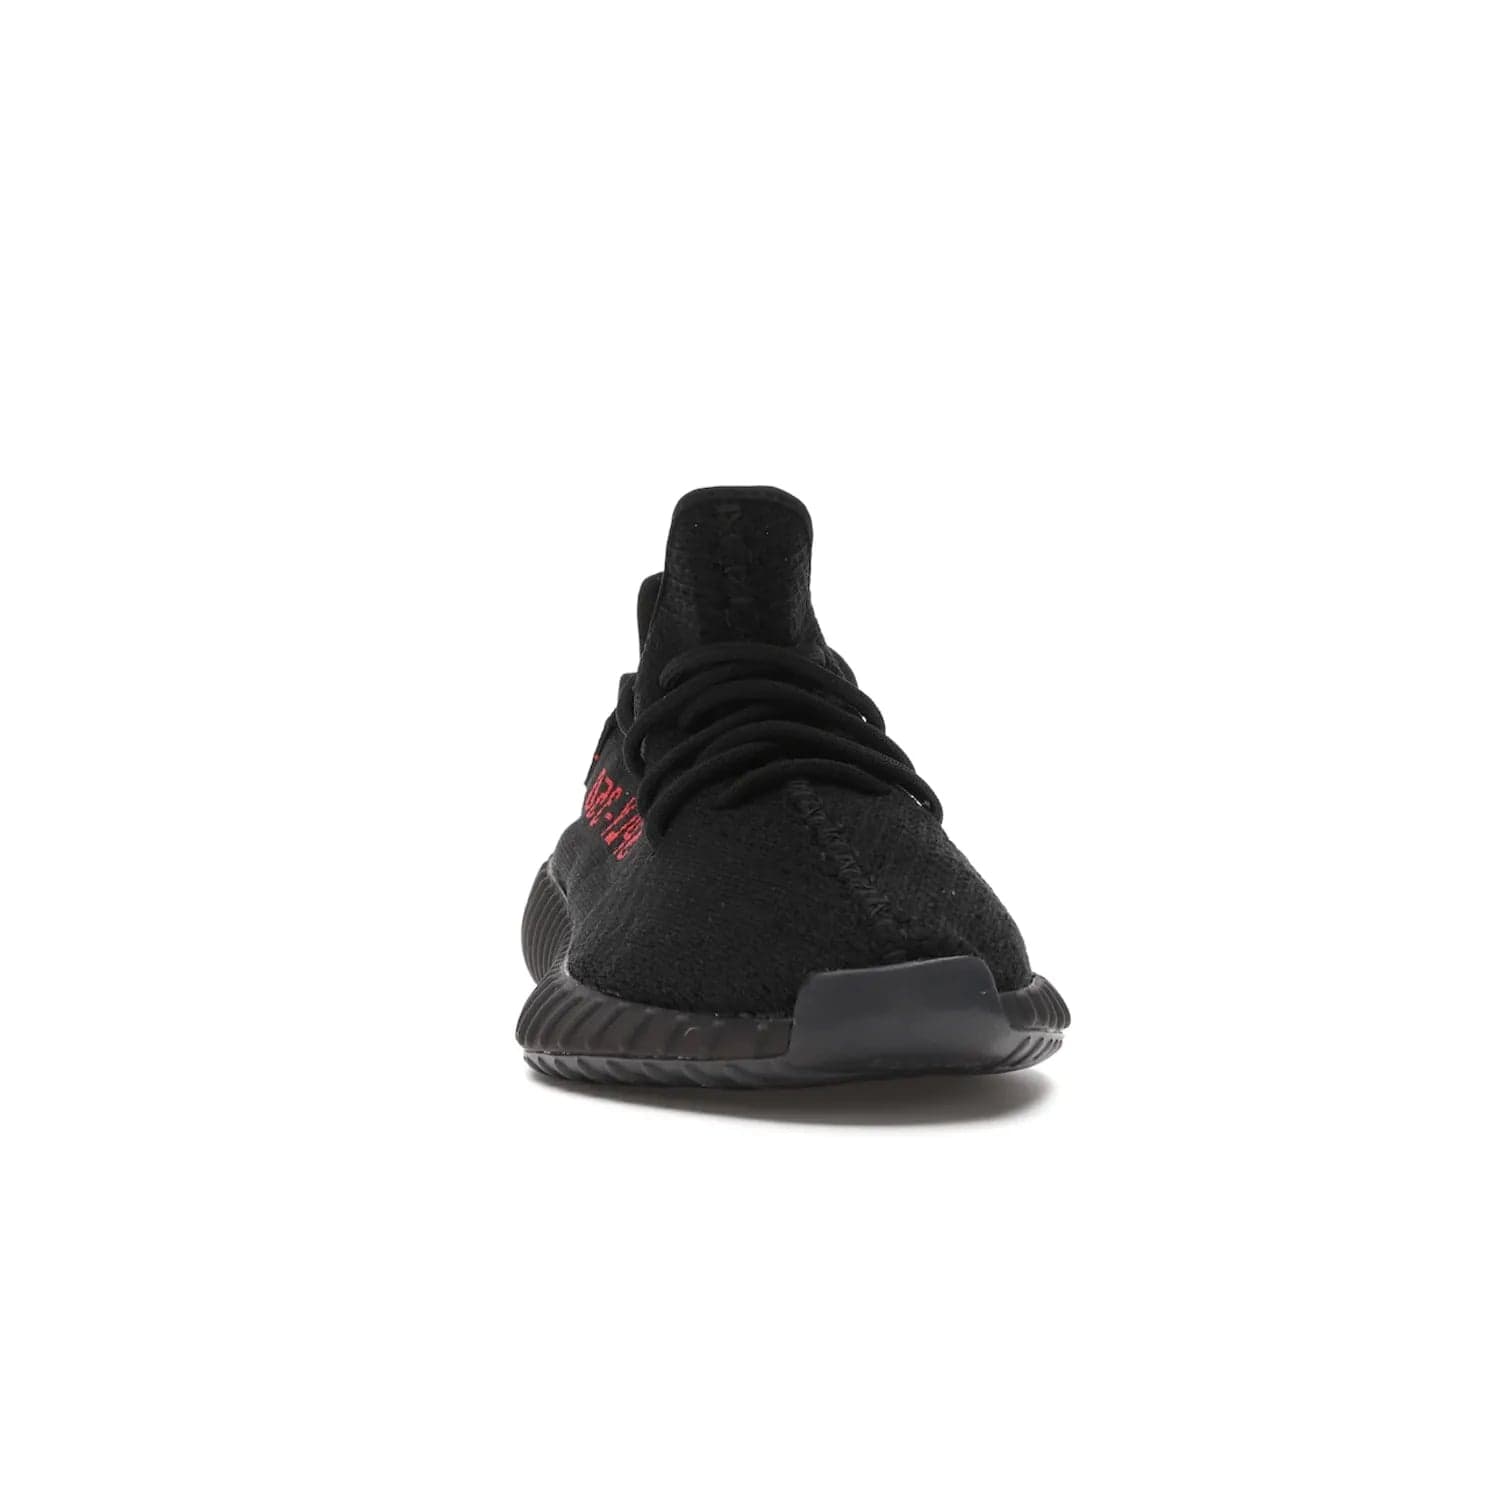 adidas Yeezy Boost 350 V2 Black Red (2017/2020) - Image 9 - Only at www.BallersClubKickz.com - Adidas Yeezy Boost 350 V2 Black Red: a classic colorway featuring black Primeknit upper, BOOST cushioning system, and iconic "SPLY-350" text. Released in 2017 for a retail price of $220.